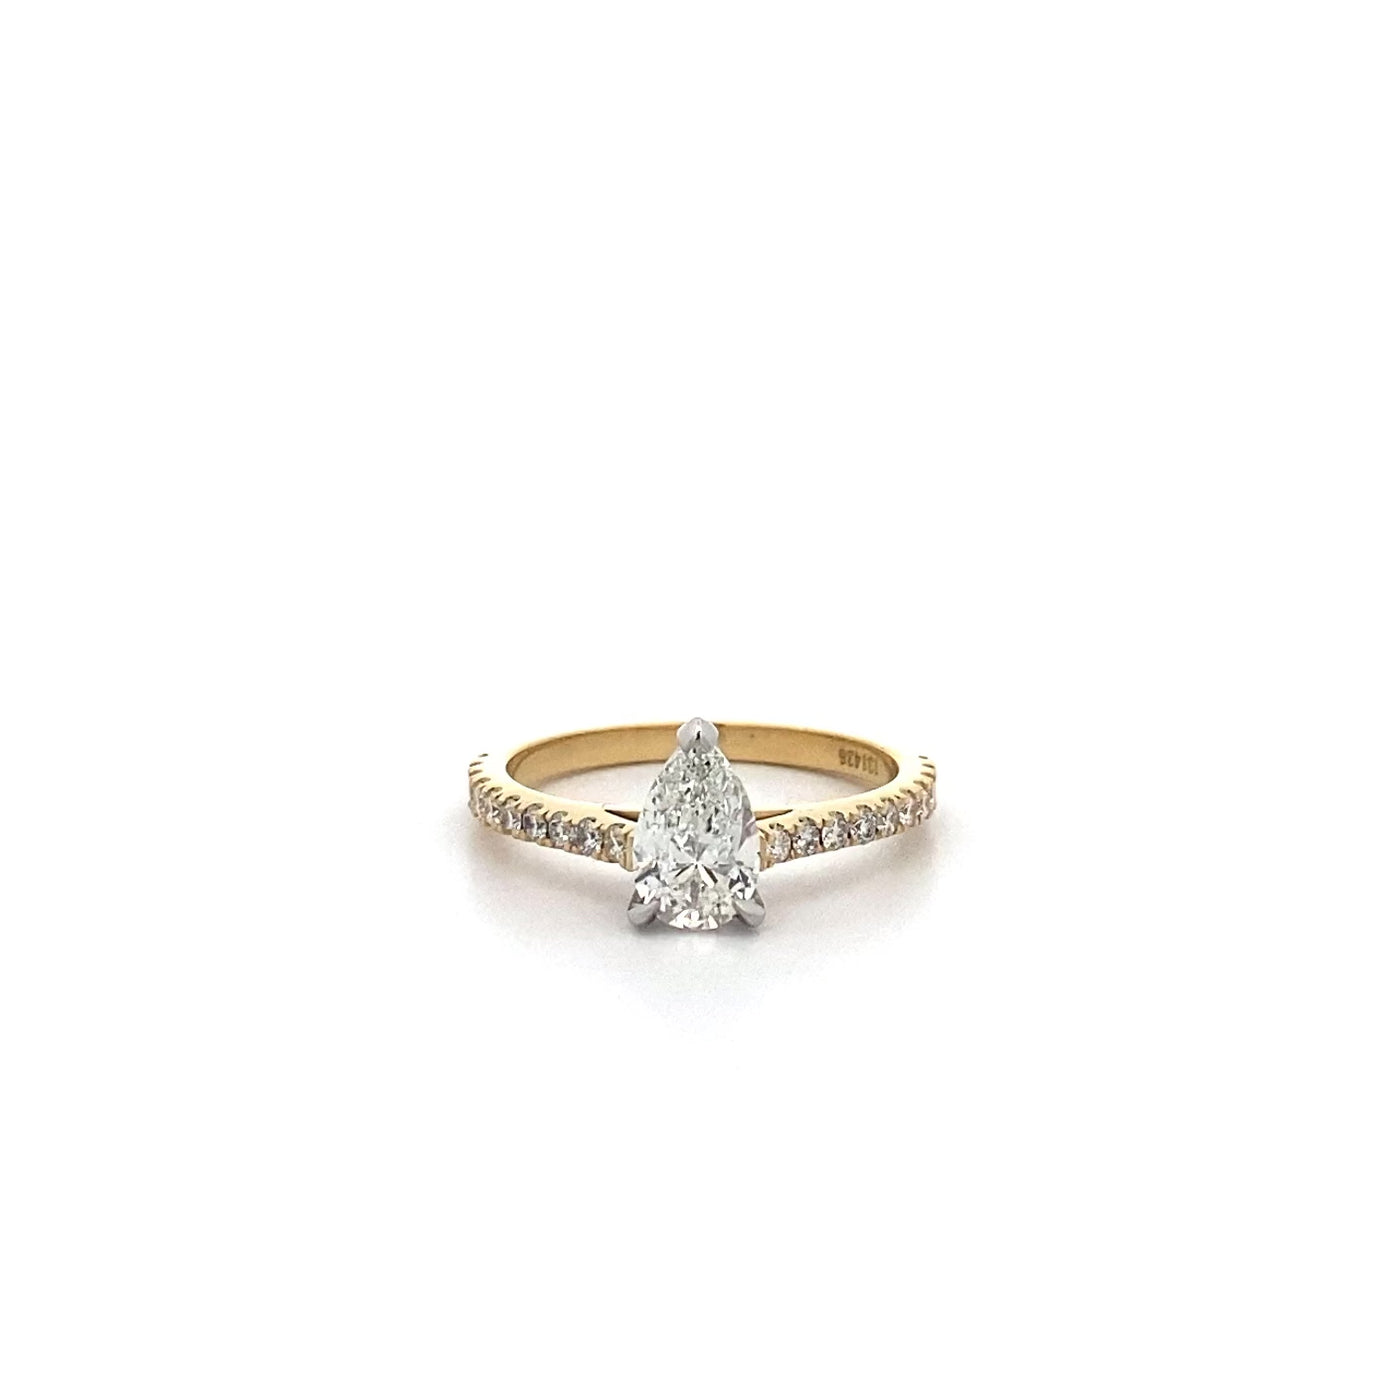 Belle: Pear Cut Diamond Solitaire Ring